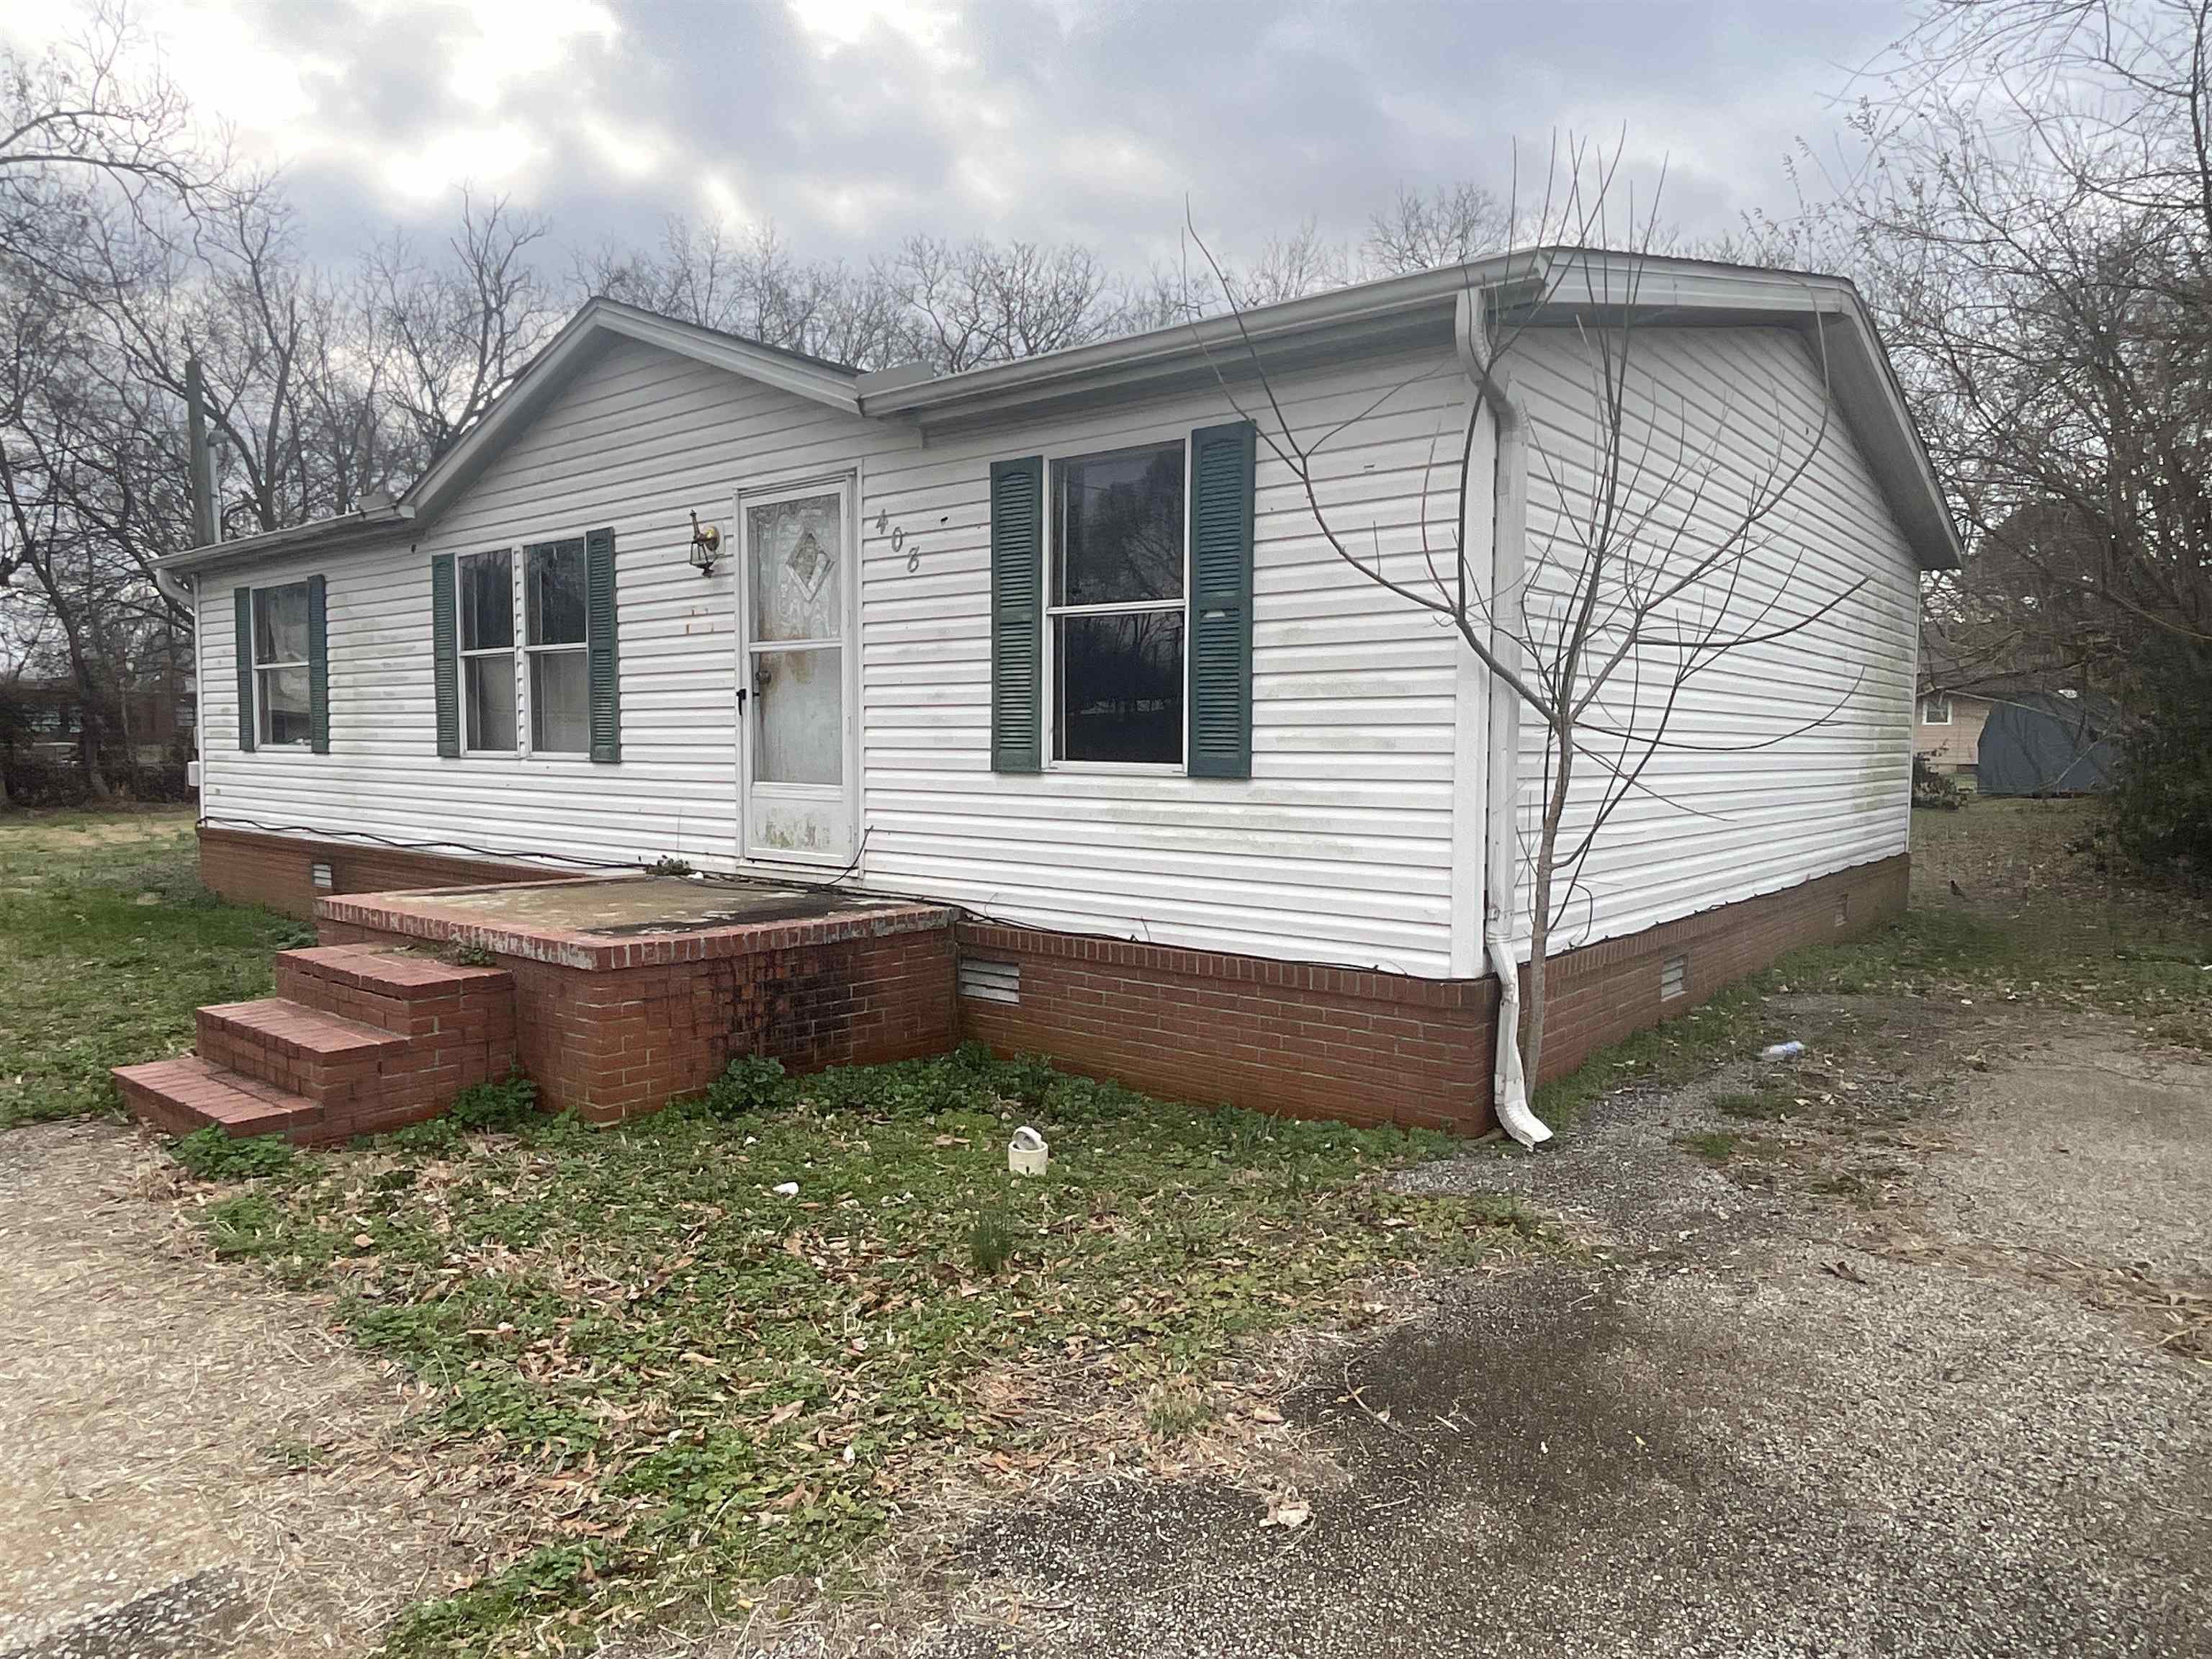 408 E 1st Street, Trenton, Tennessee 38382, 3 Bedrooms Bedrooms, ,2 BathroomsBathrooms,Residential,For Sale,408 E 1st Street,240879